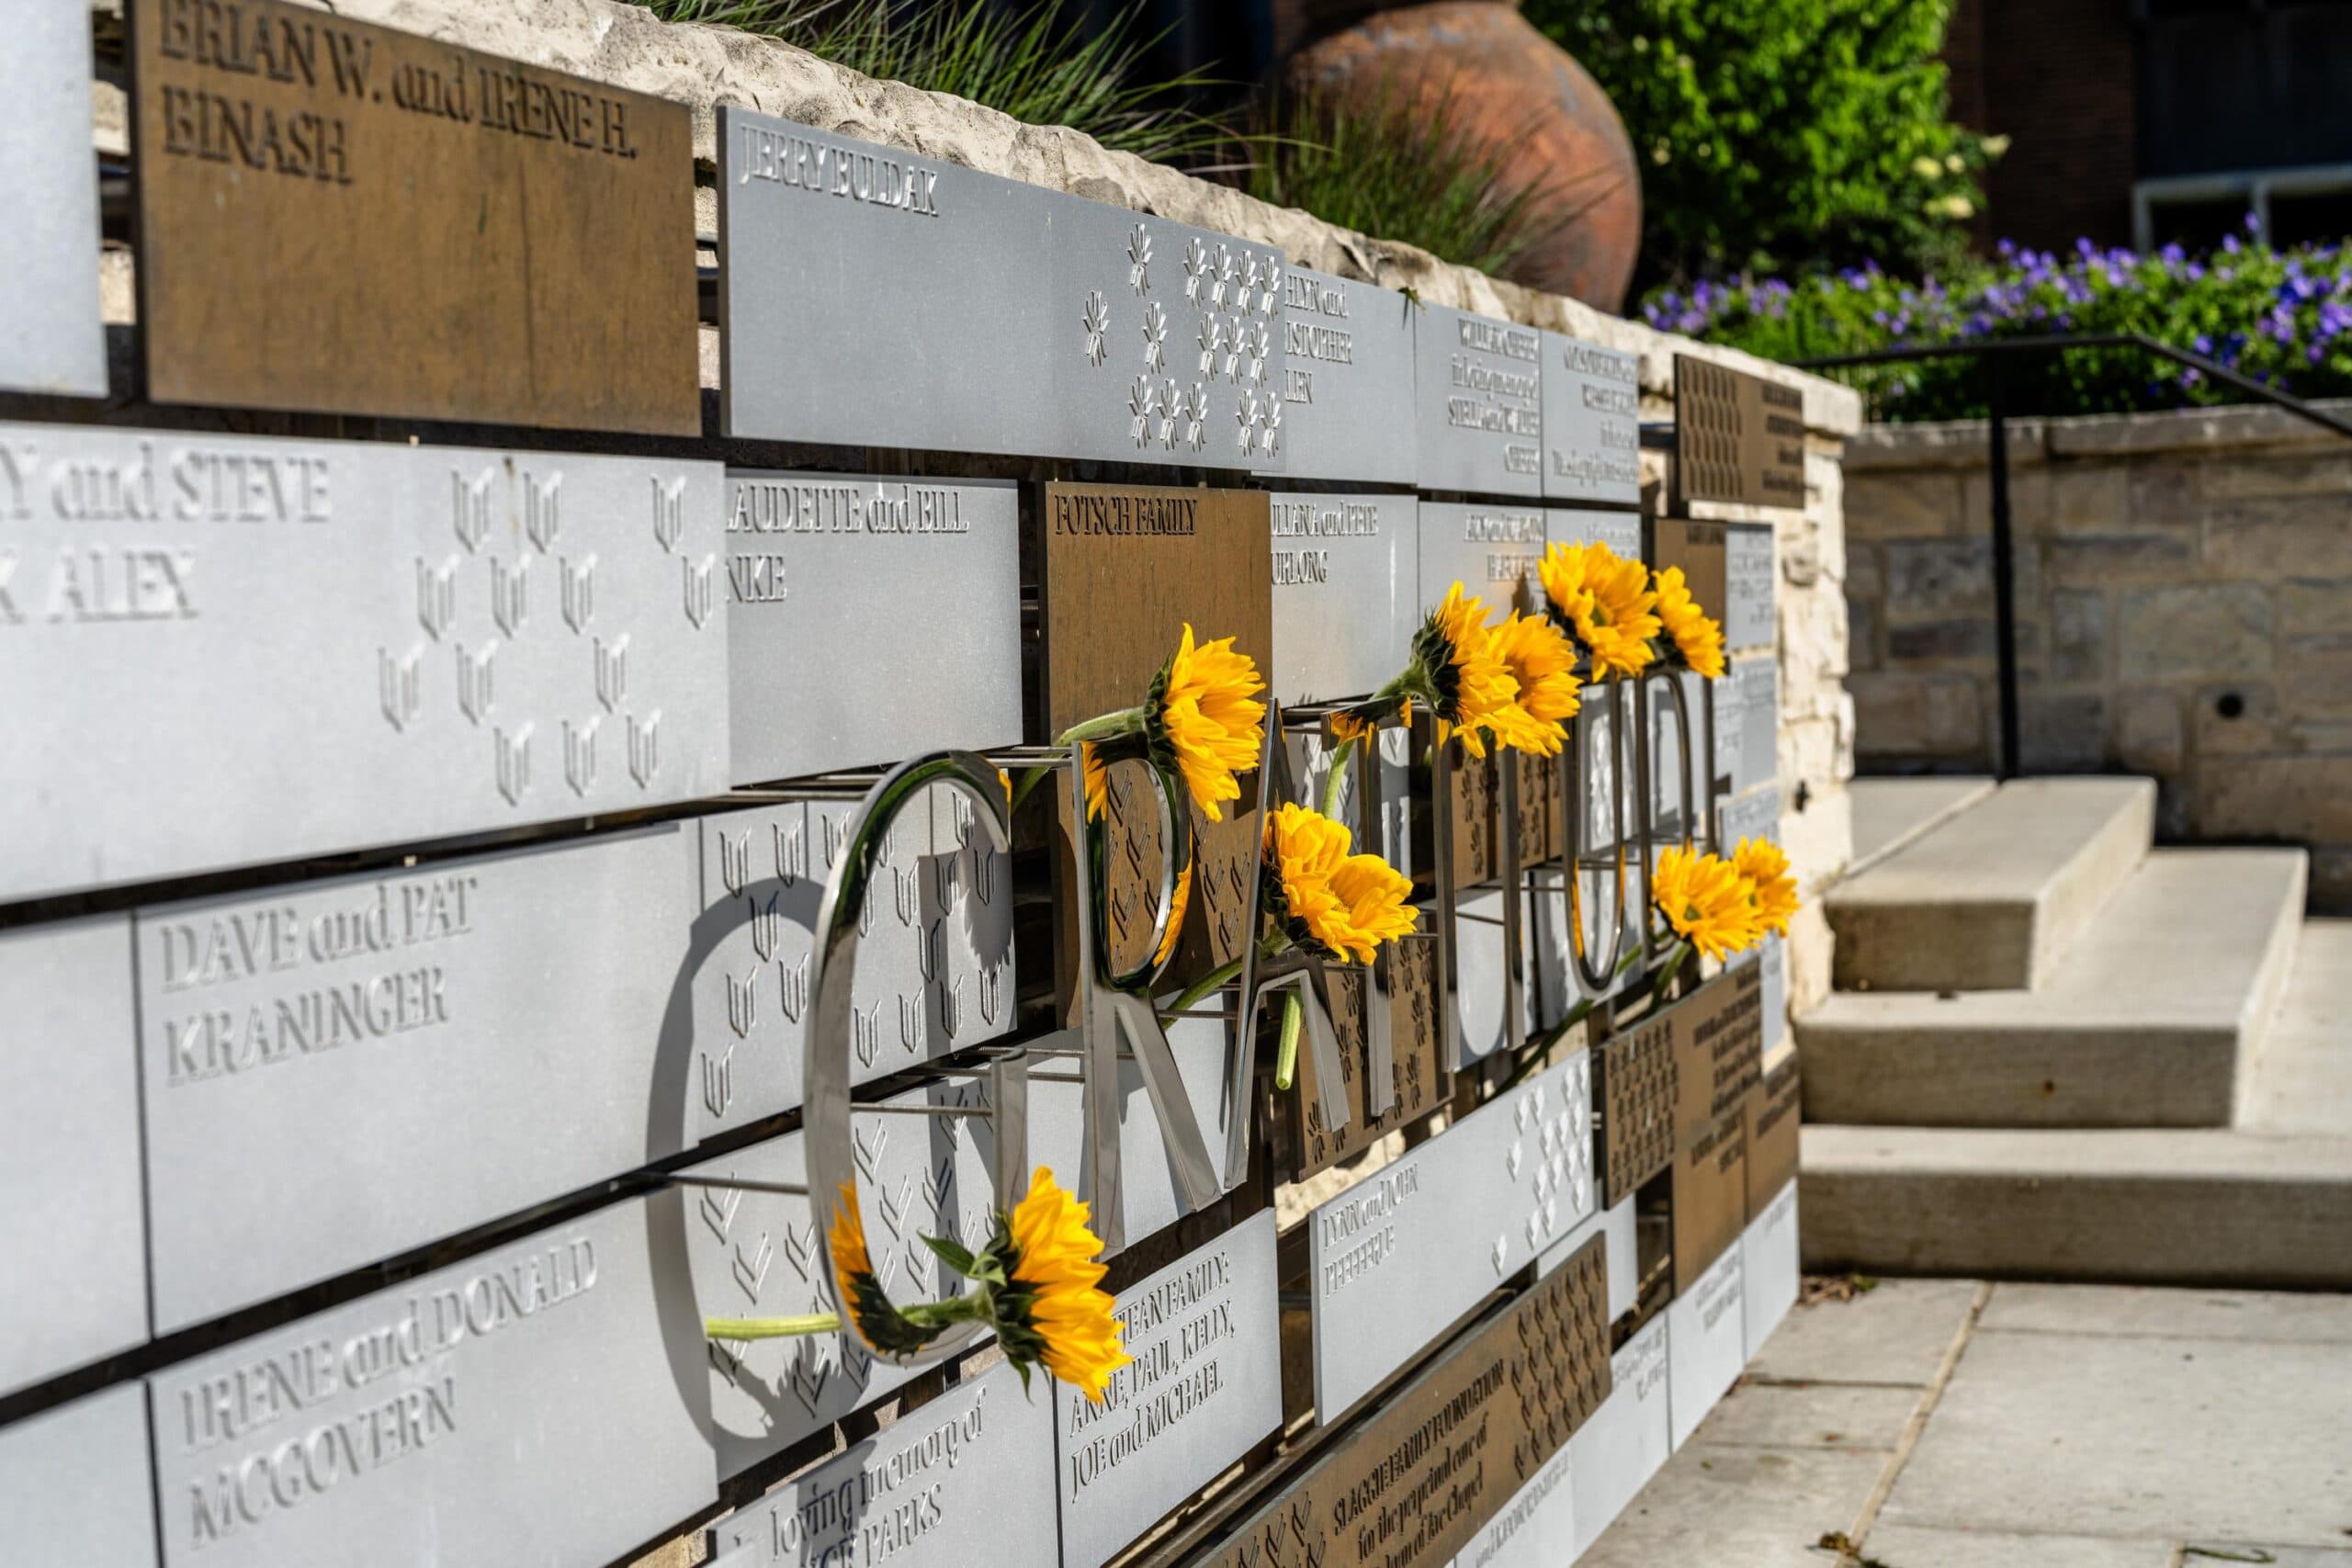 A close up of sunflowers on a donor wall near St. Joan of Arc chapel steps.